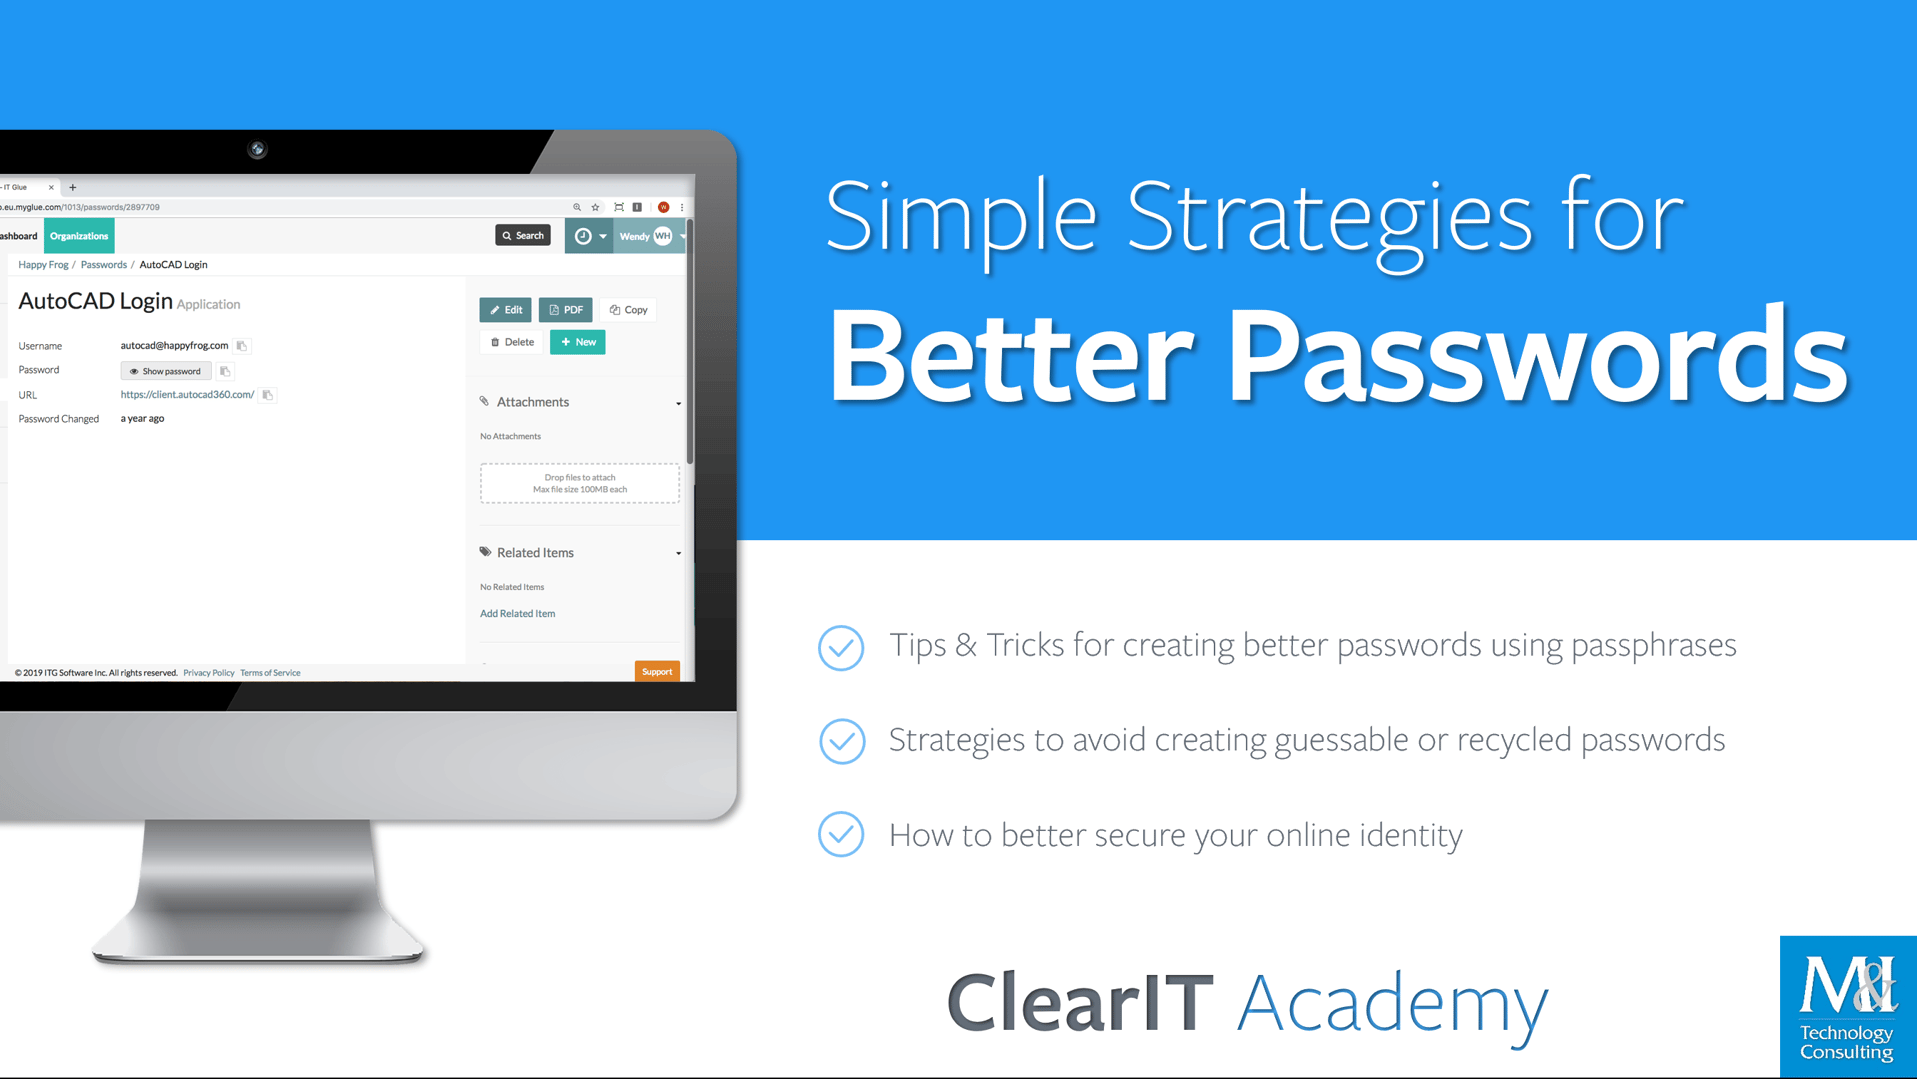 clearit-academy-simple-strategies-for-better-passwords-title-slide